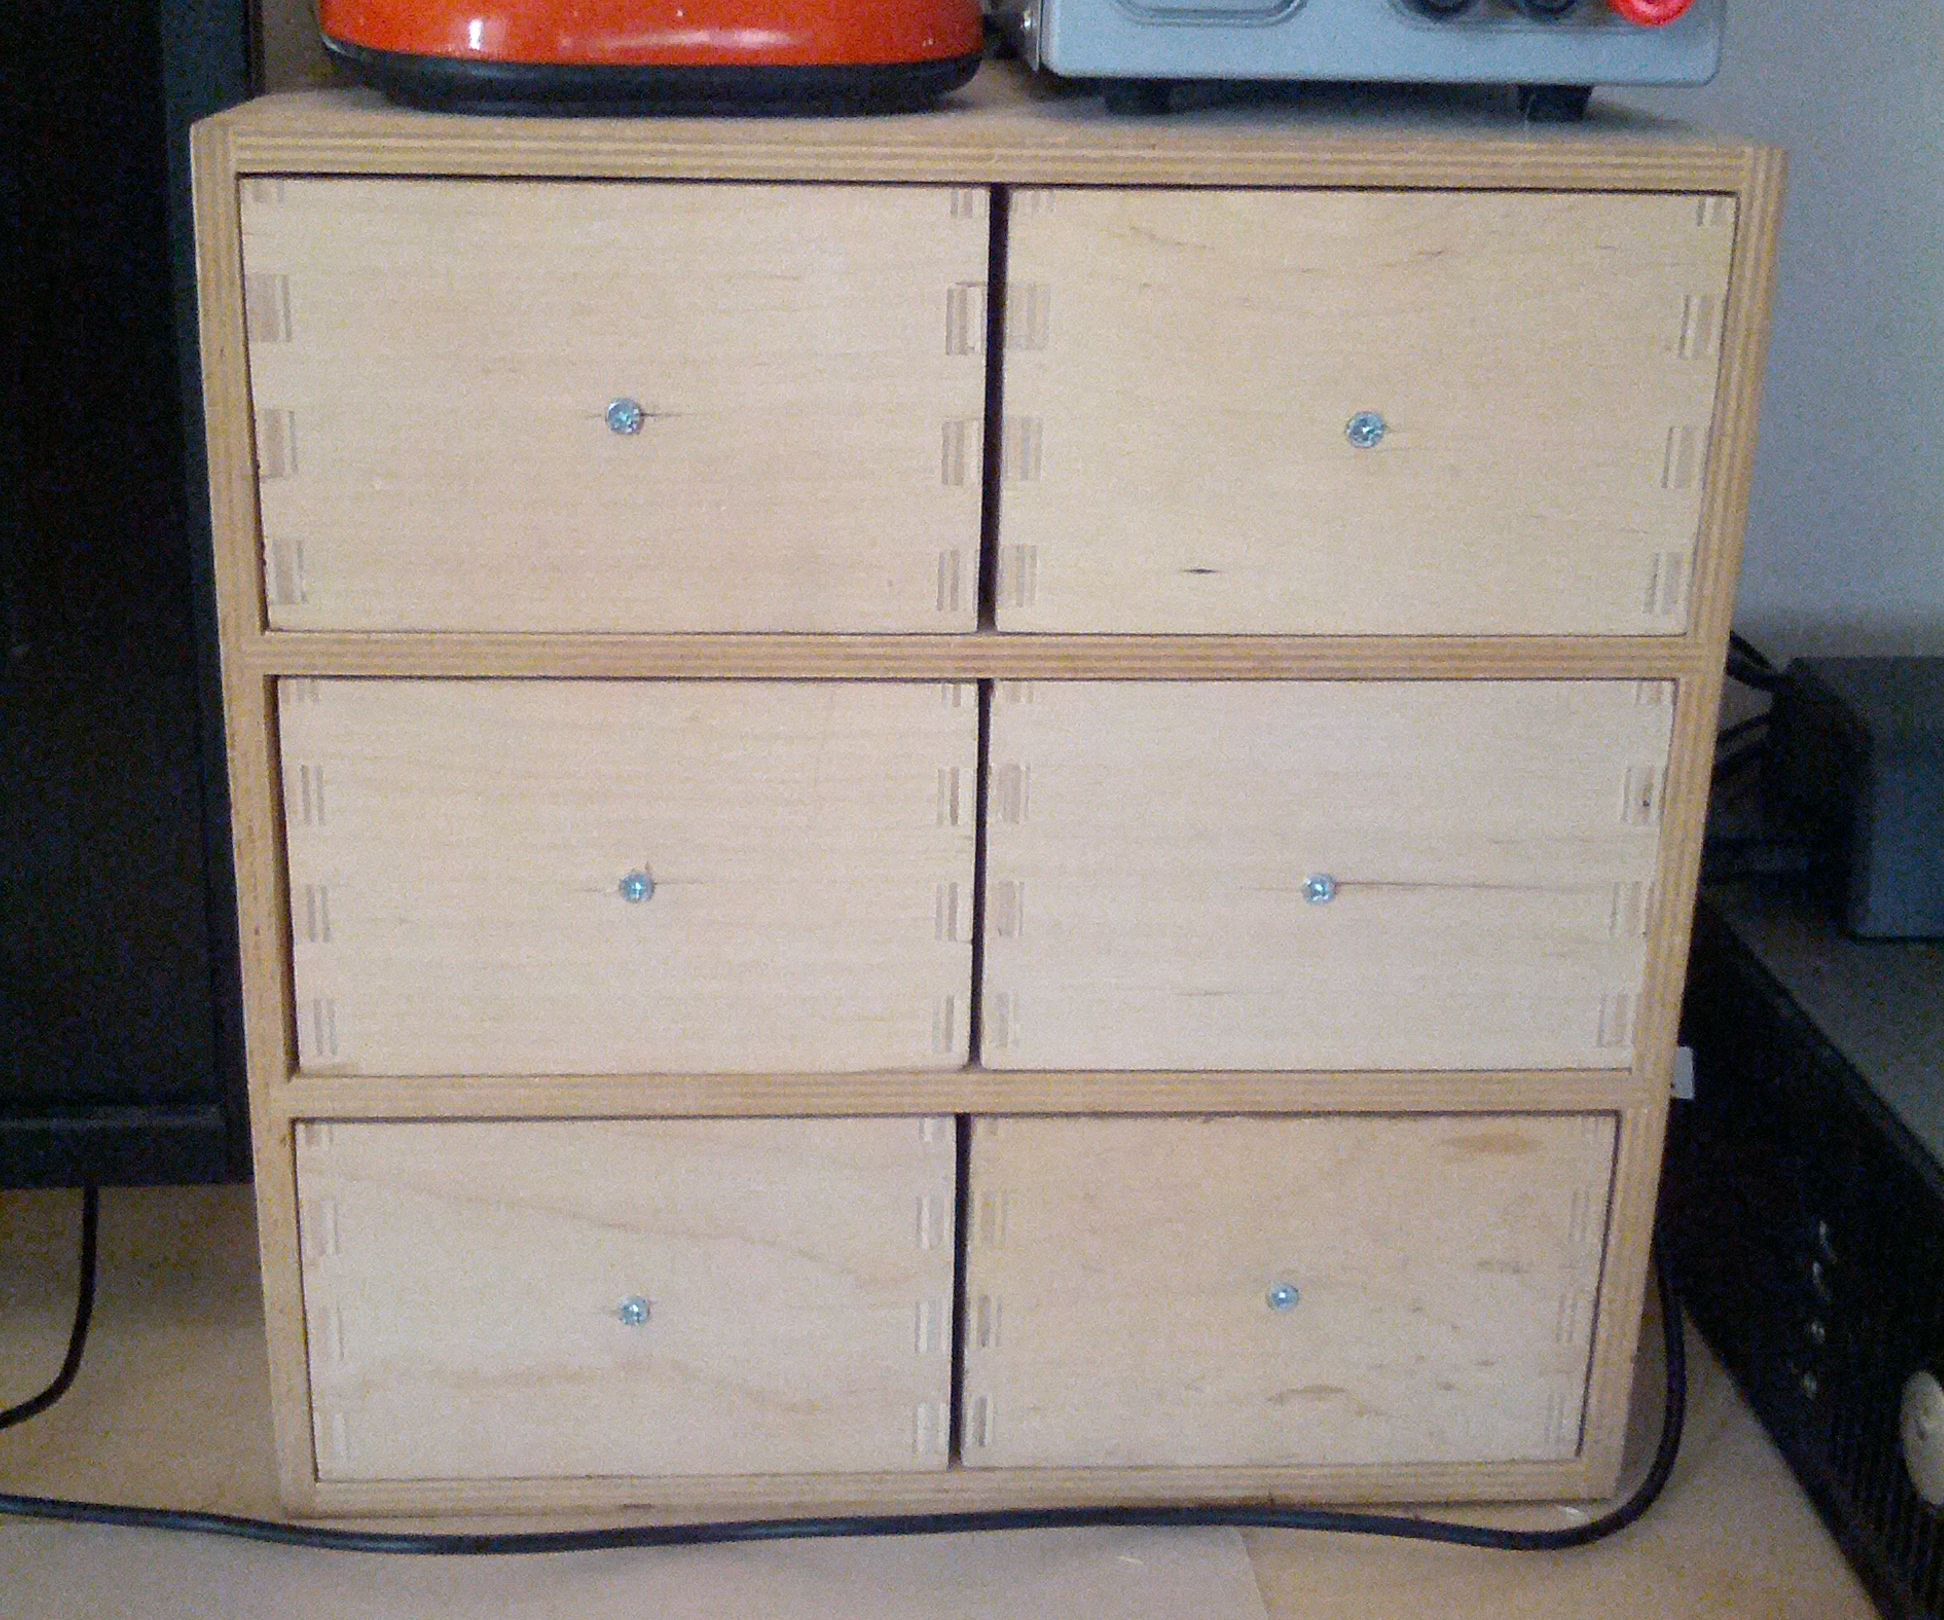 Childproof Drawers for Your Parts